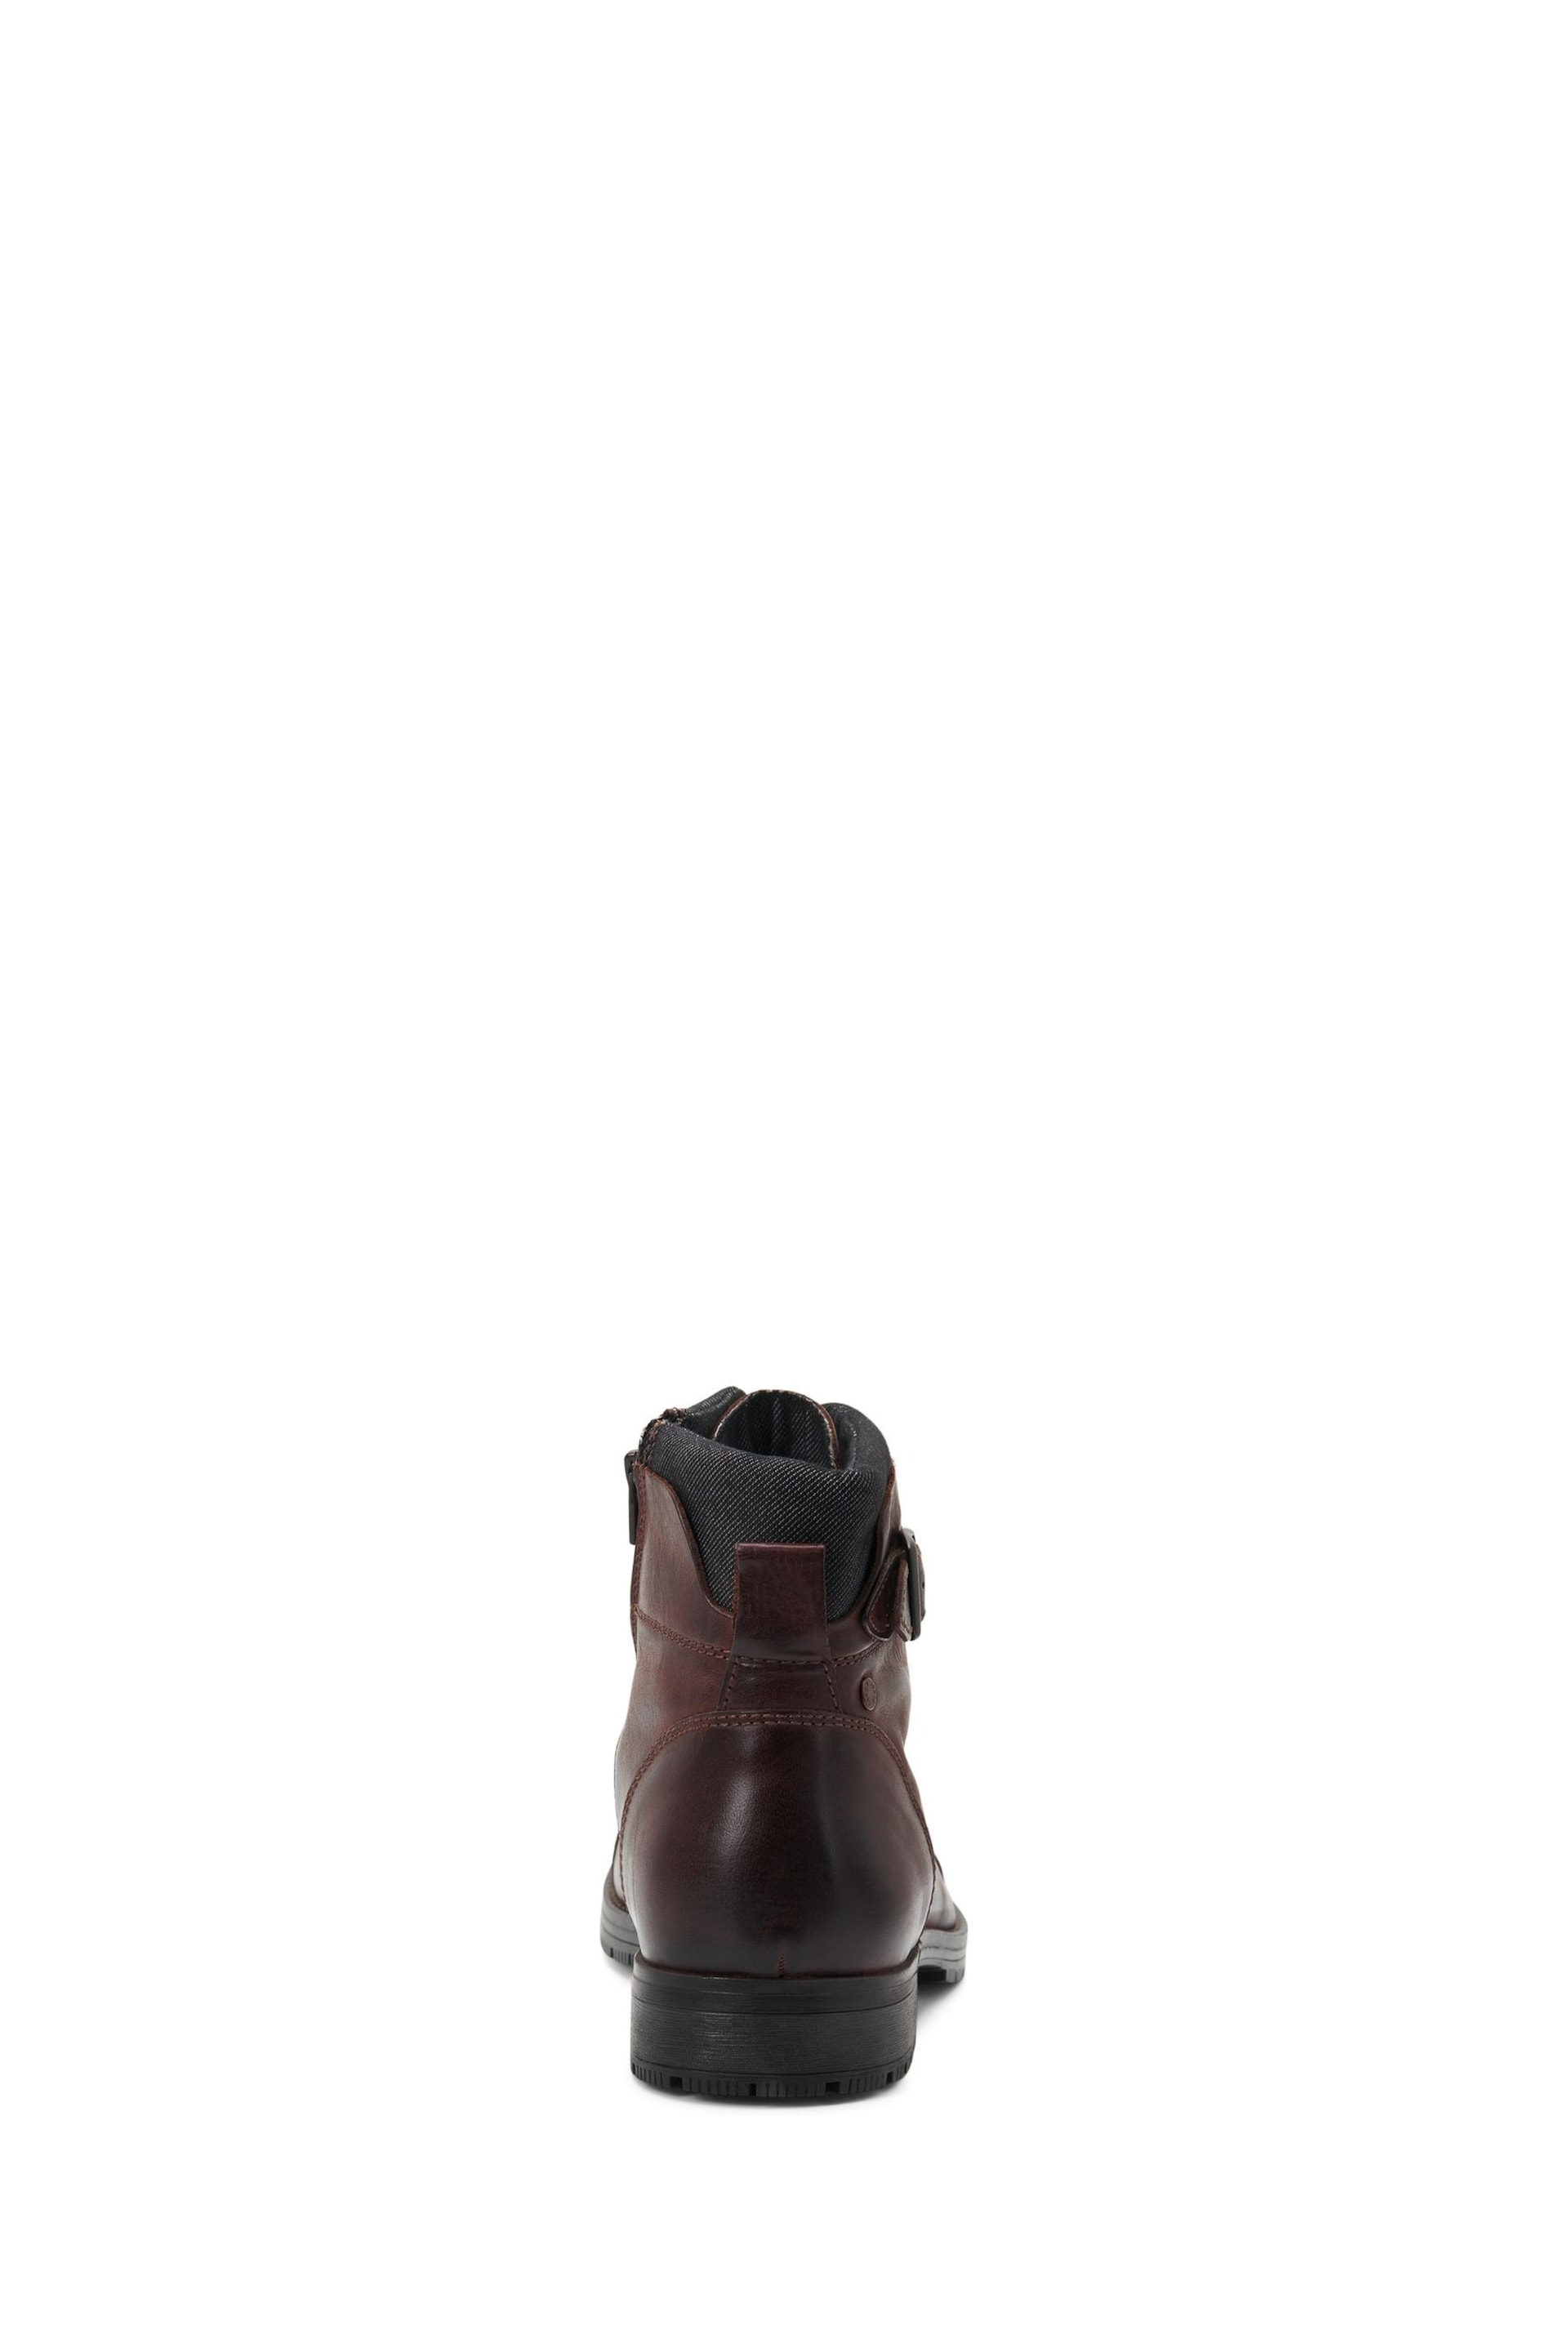 JACK & JONES Brown Leather Boots - Image 4 of 6